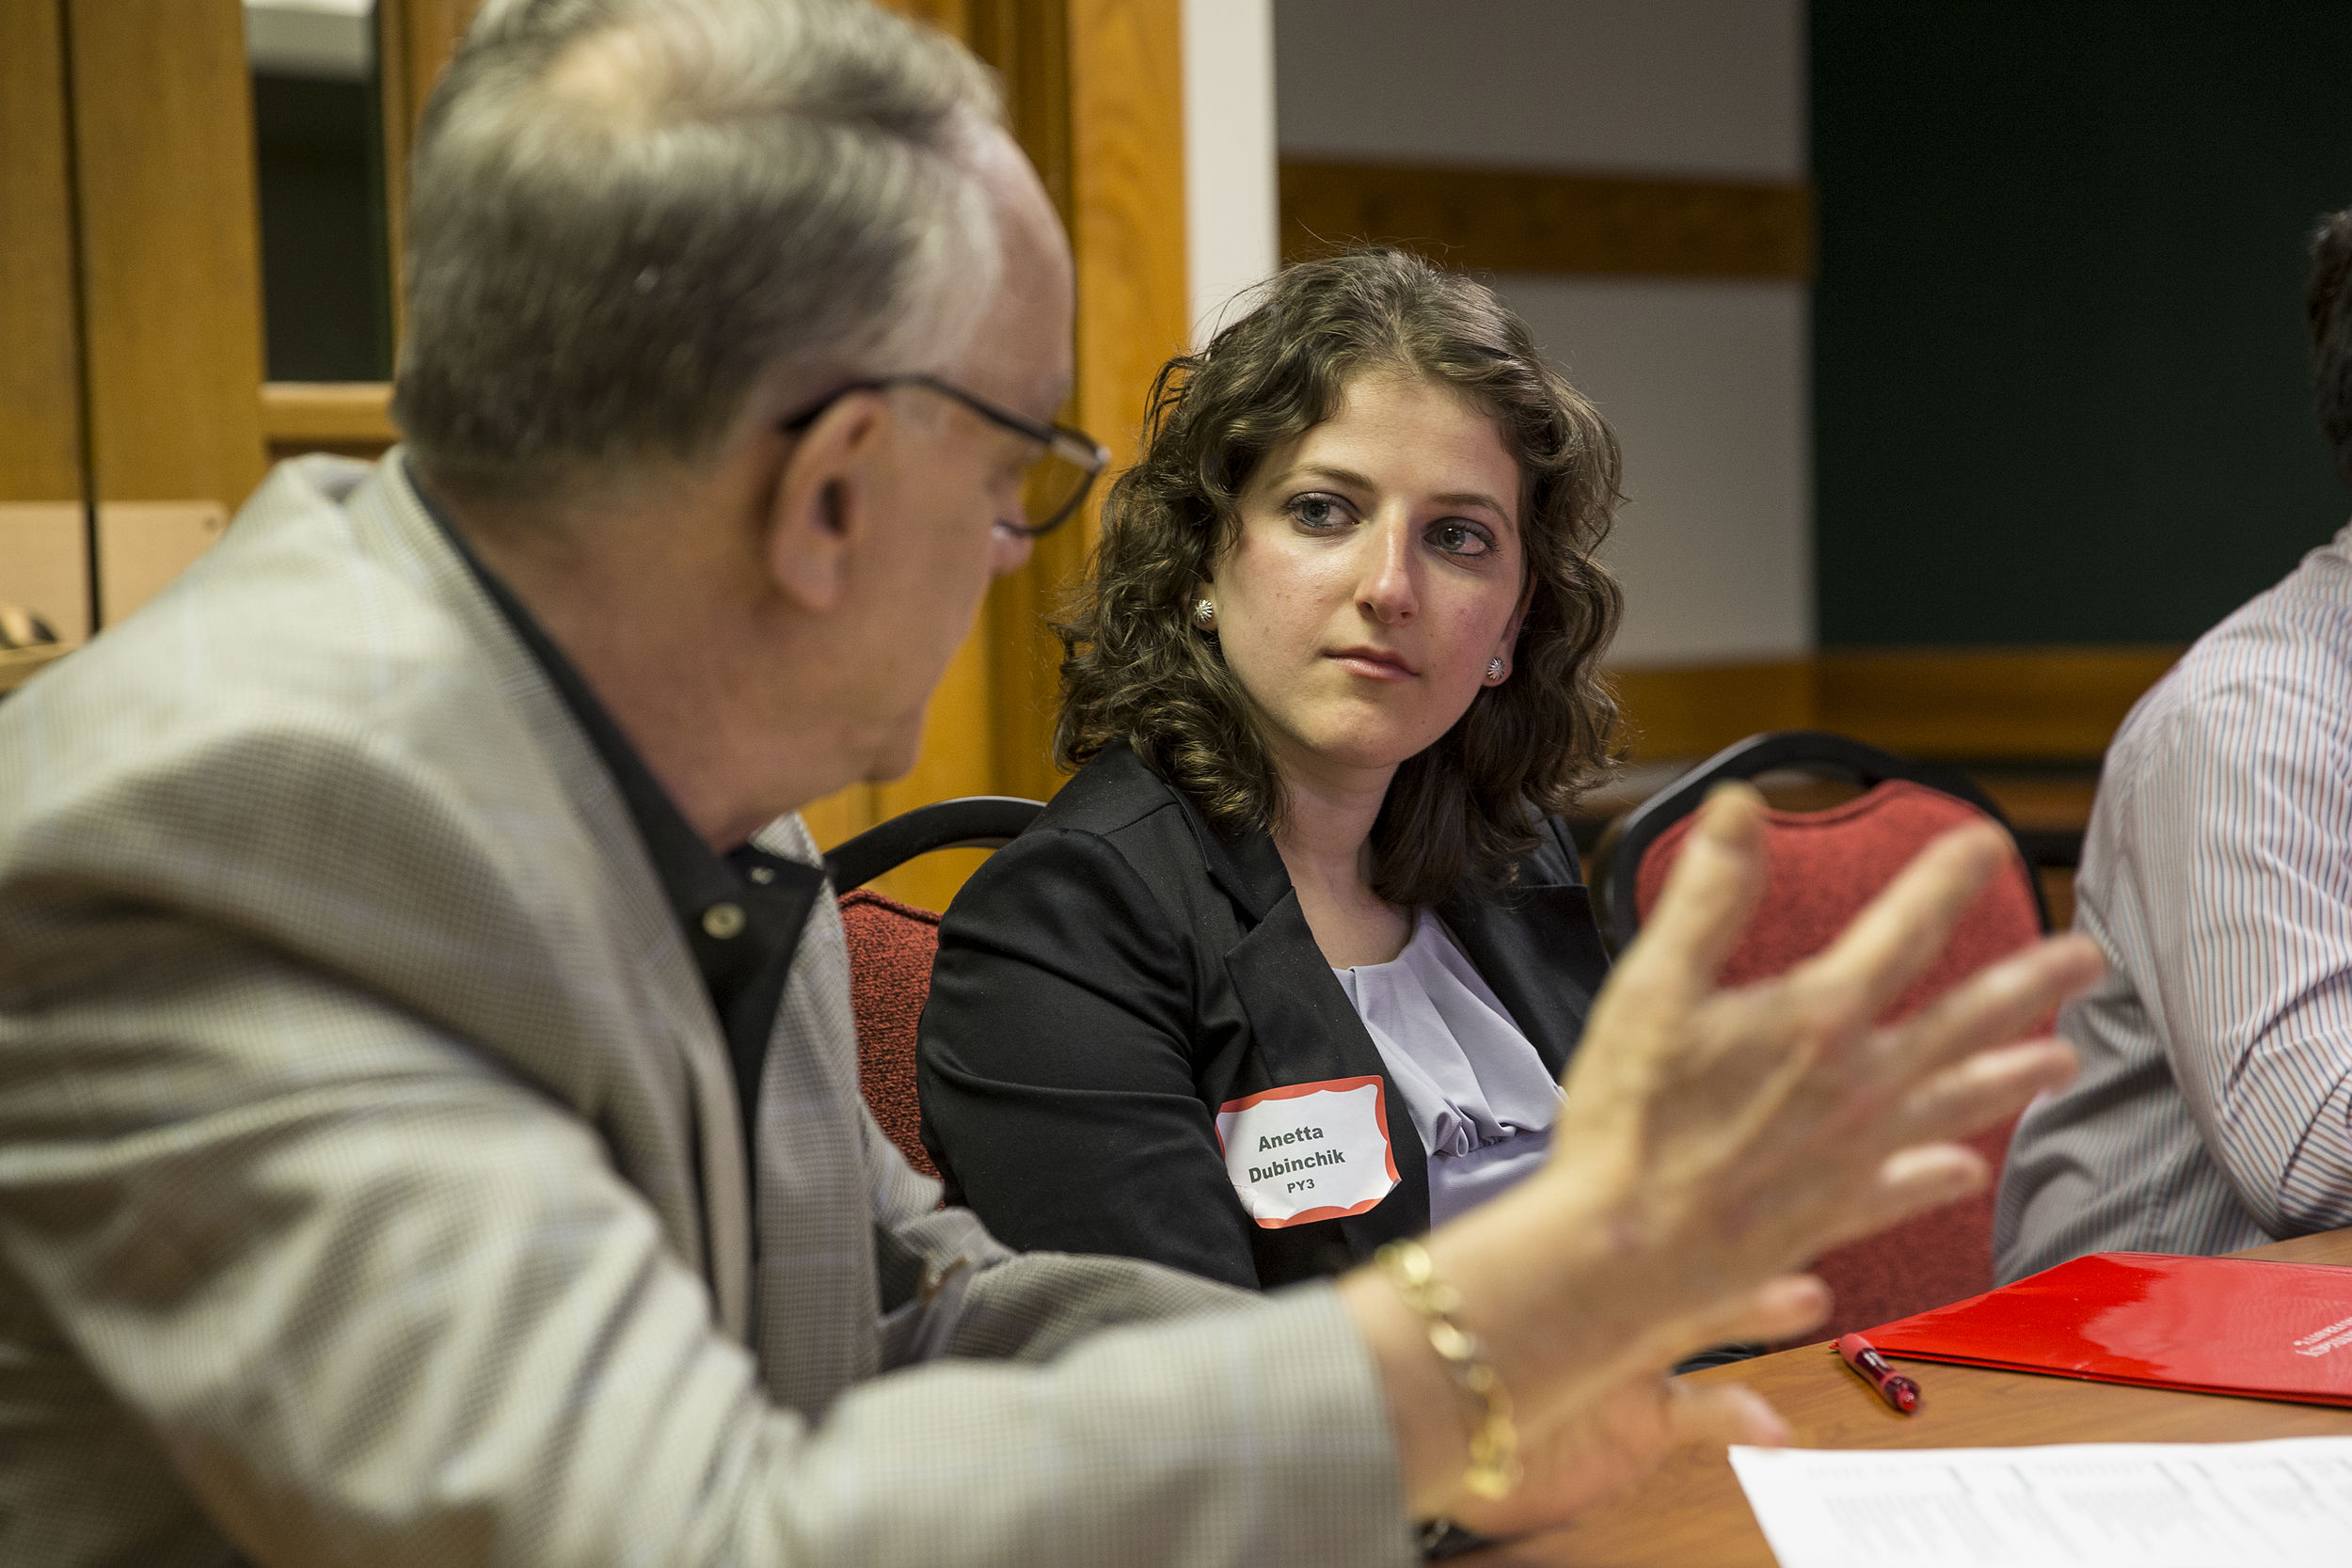 A Temple student discusses an education plan with their mentor.